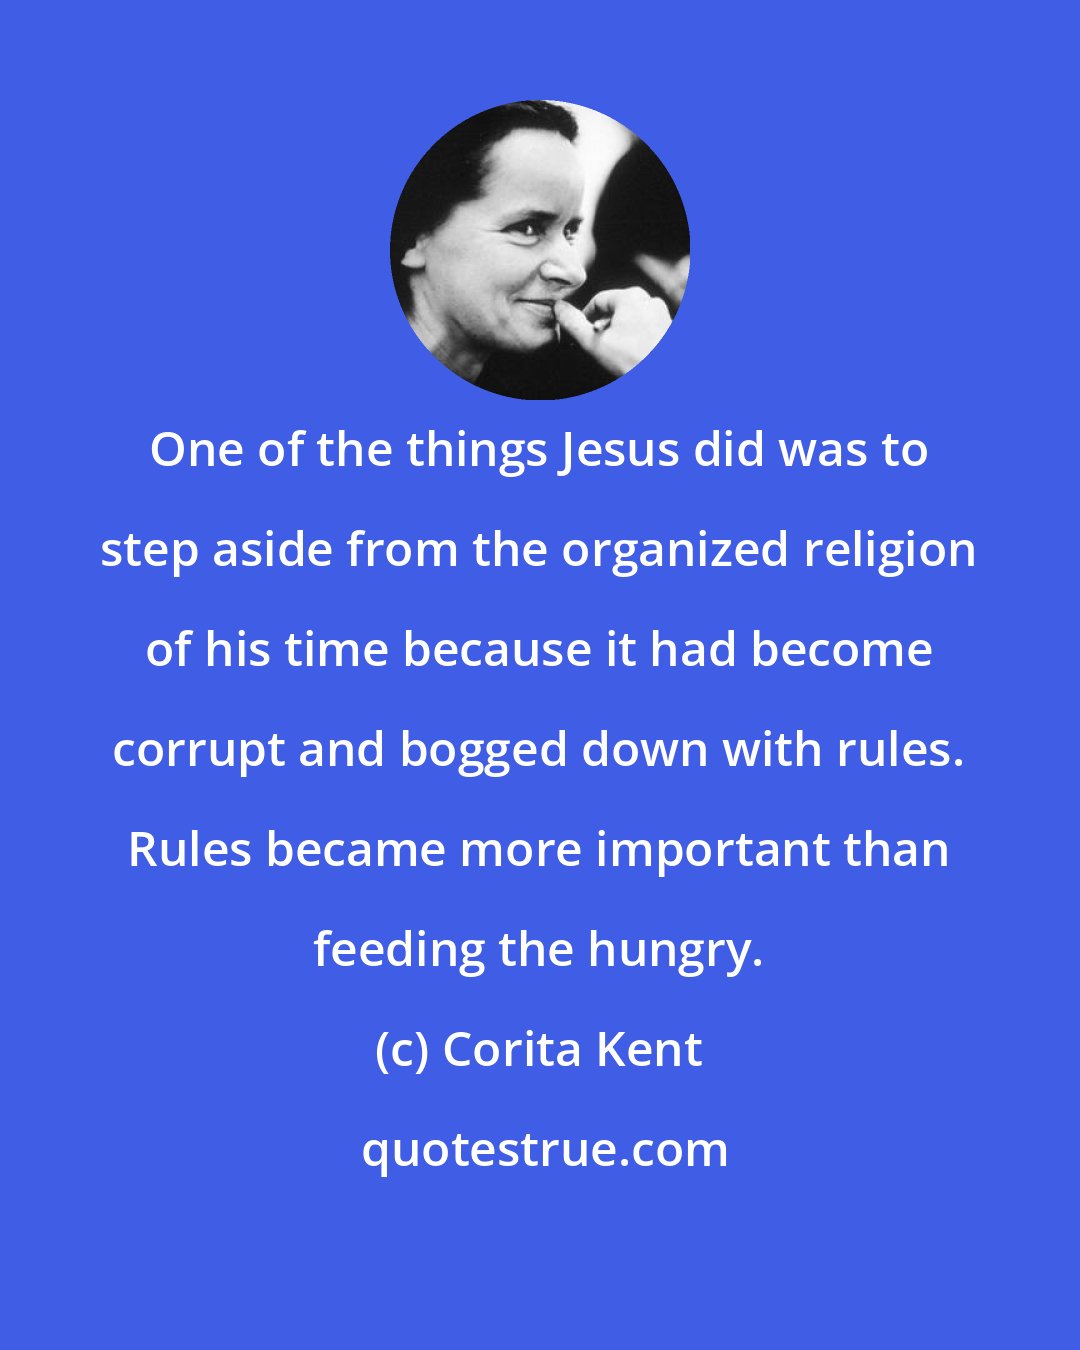 Corita Kent: One of the things Jesus did was to step aside from the organized religion of his time because it had become corrupt and bogged down with rules. Rules became more important than feeding the hungry.